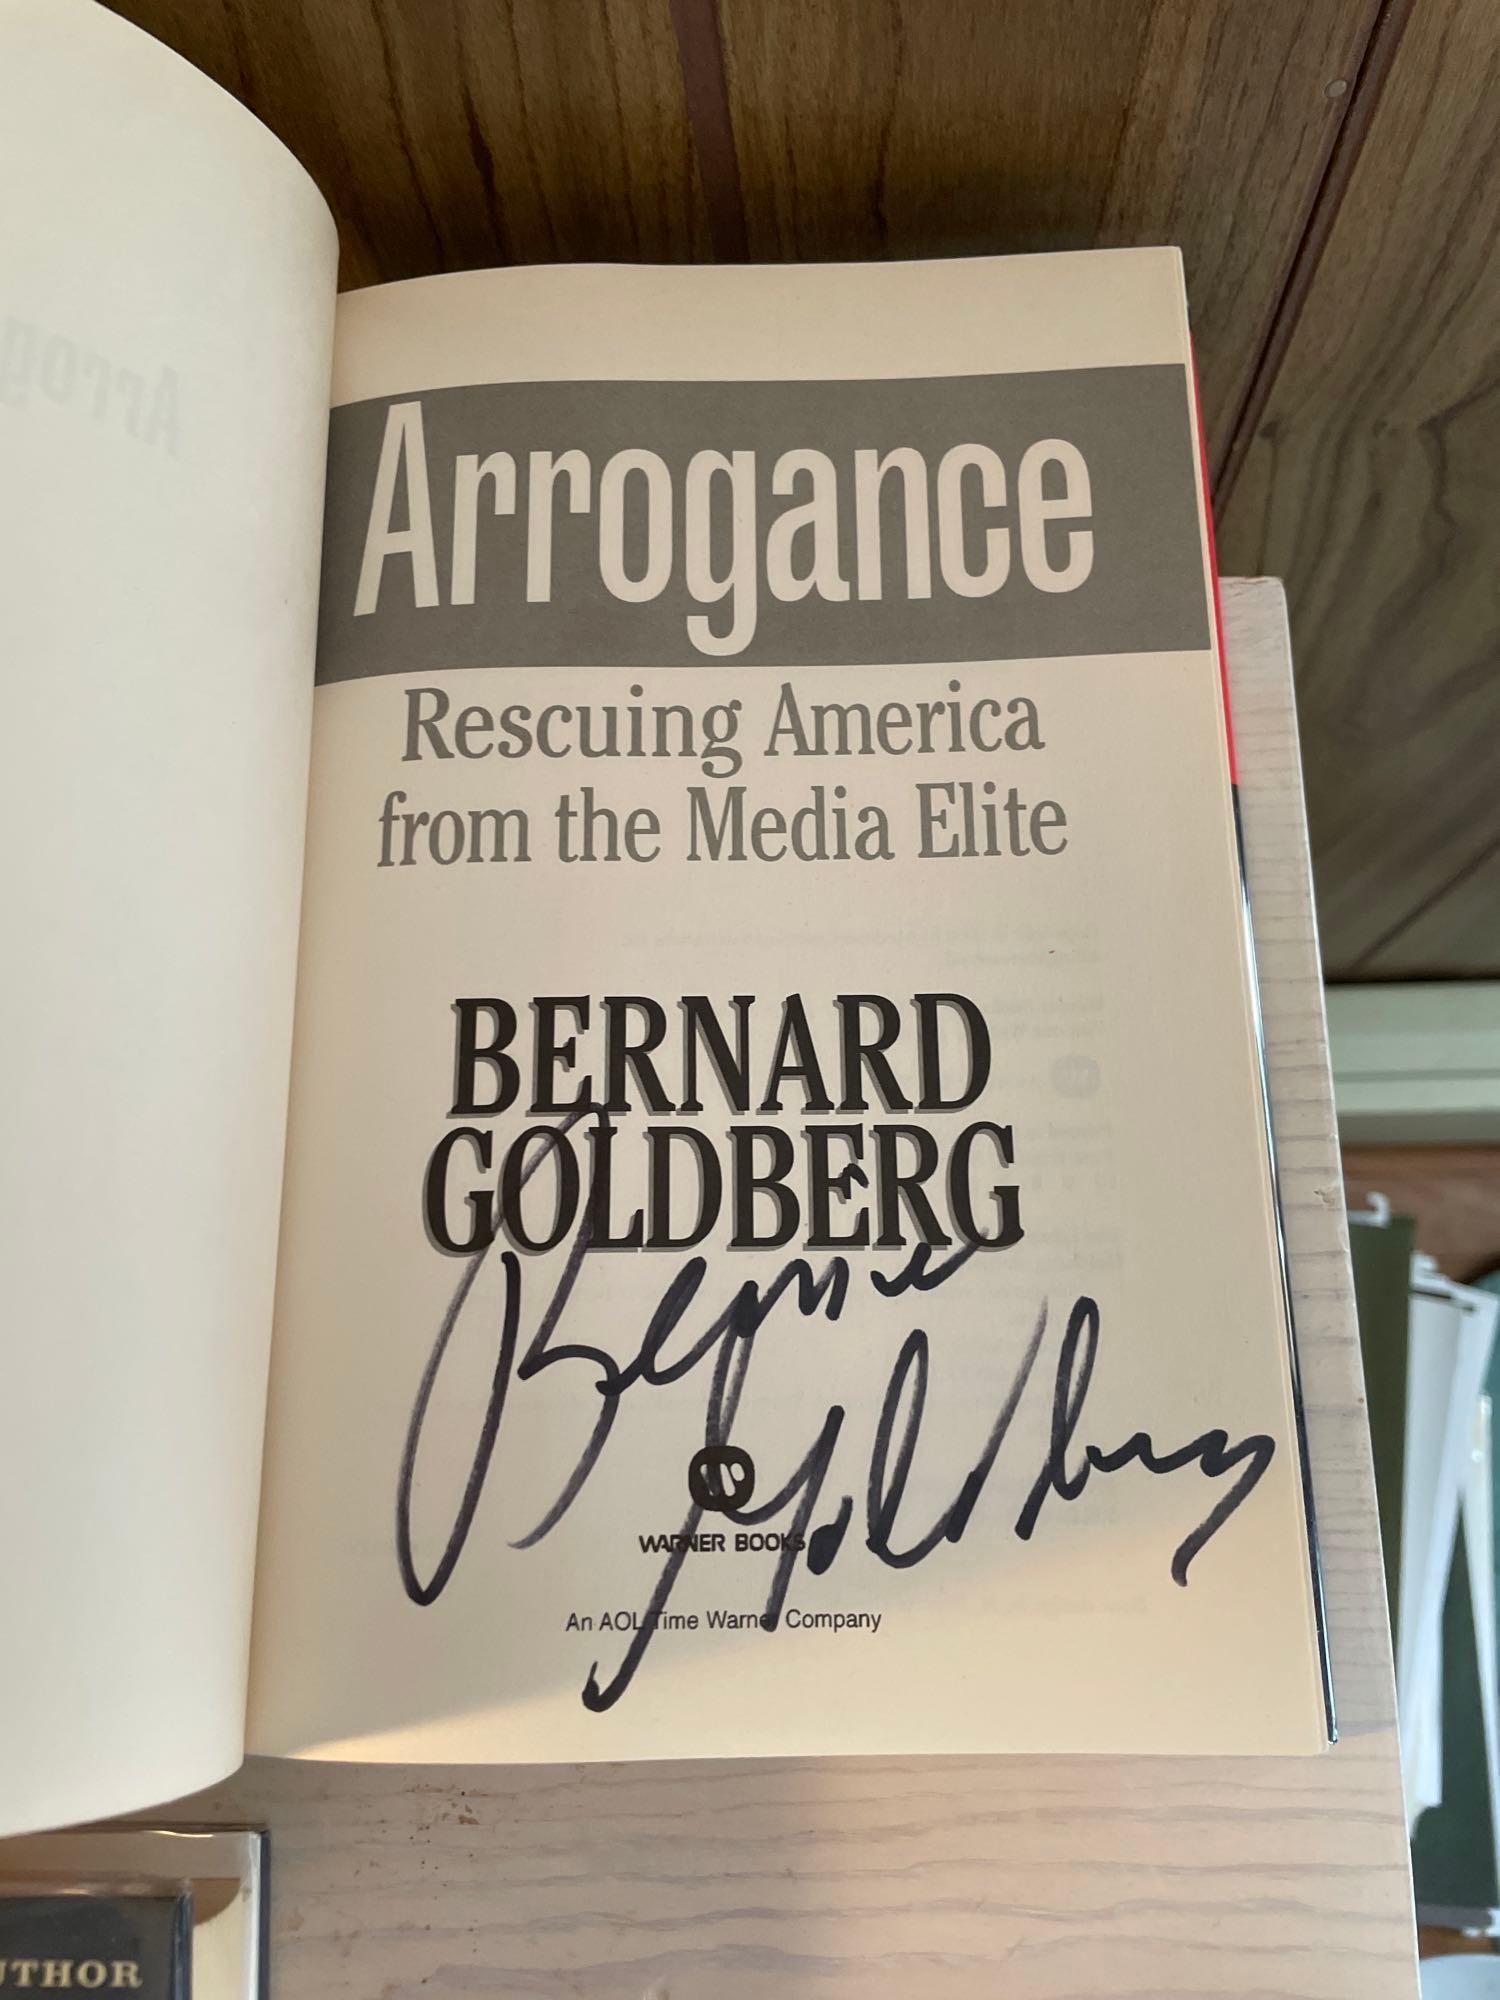 Assorted Signed HC Political Books (11)